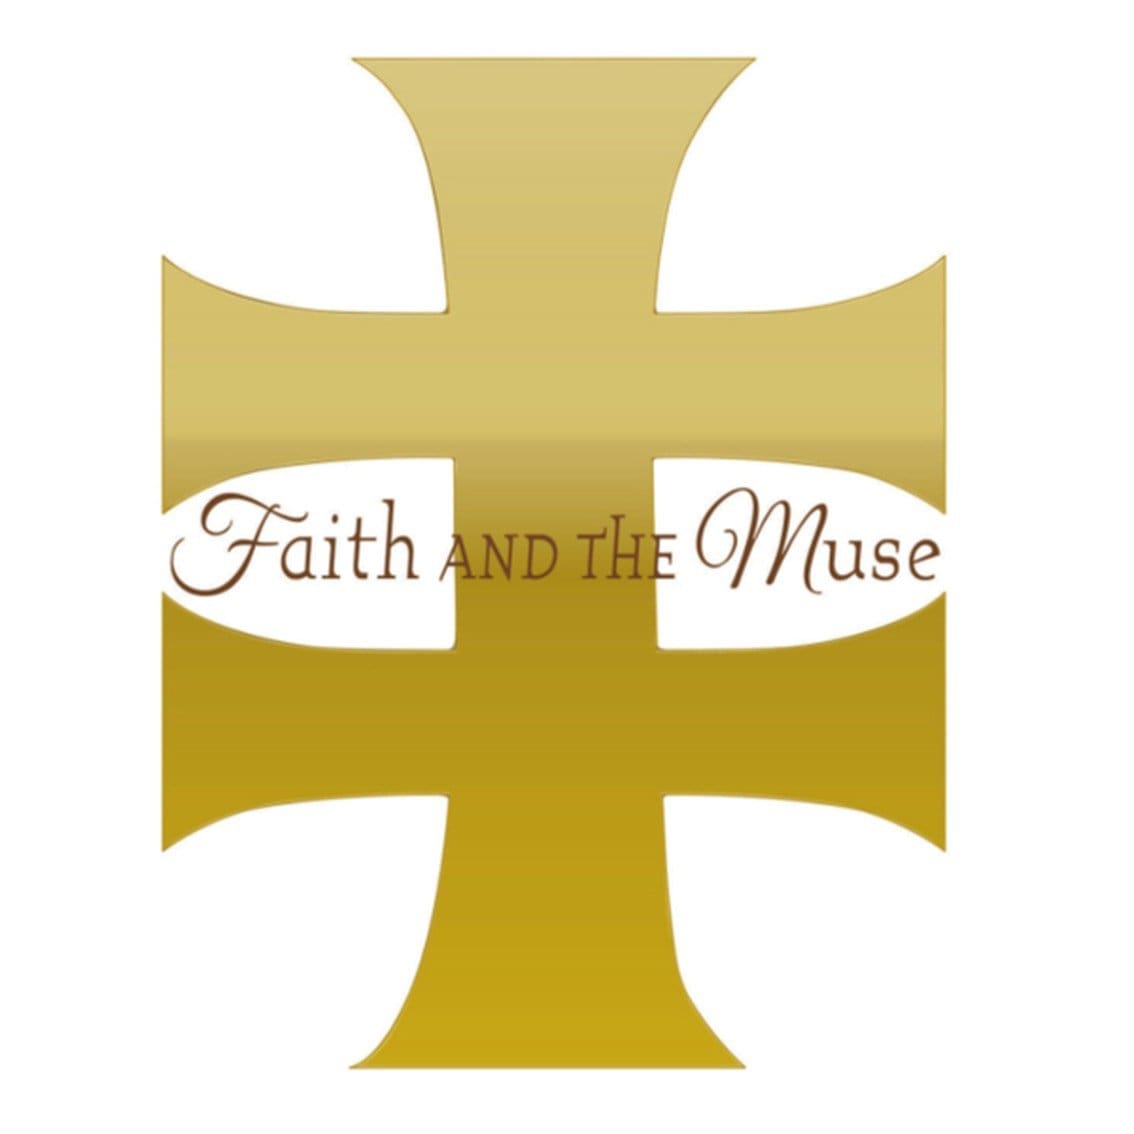 Faith and the Muse to release a 2CD personal best of 'Where the Land Meets the Sea: The Best Loved Songs of Faith and the Muse'